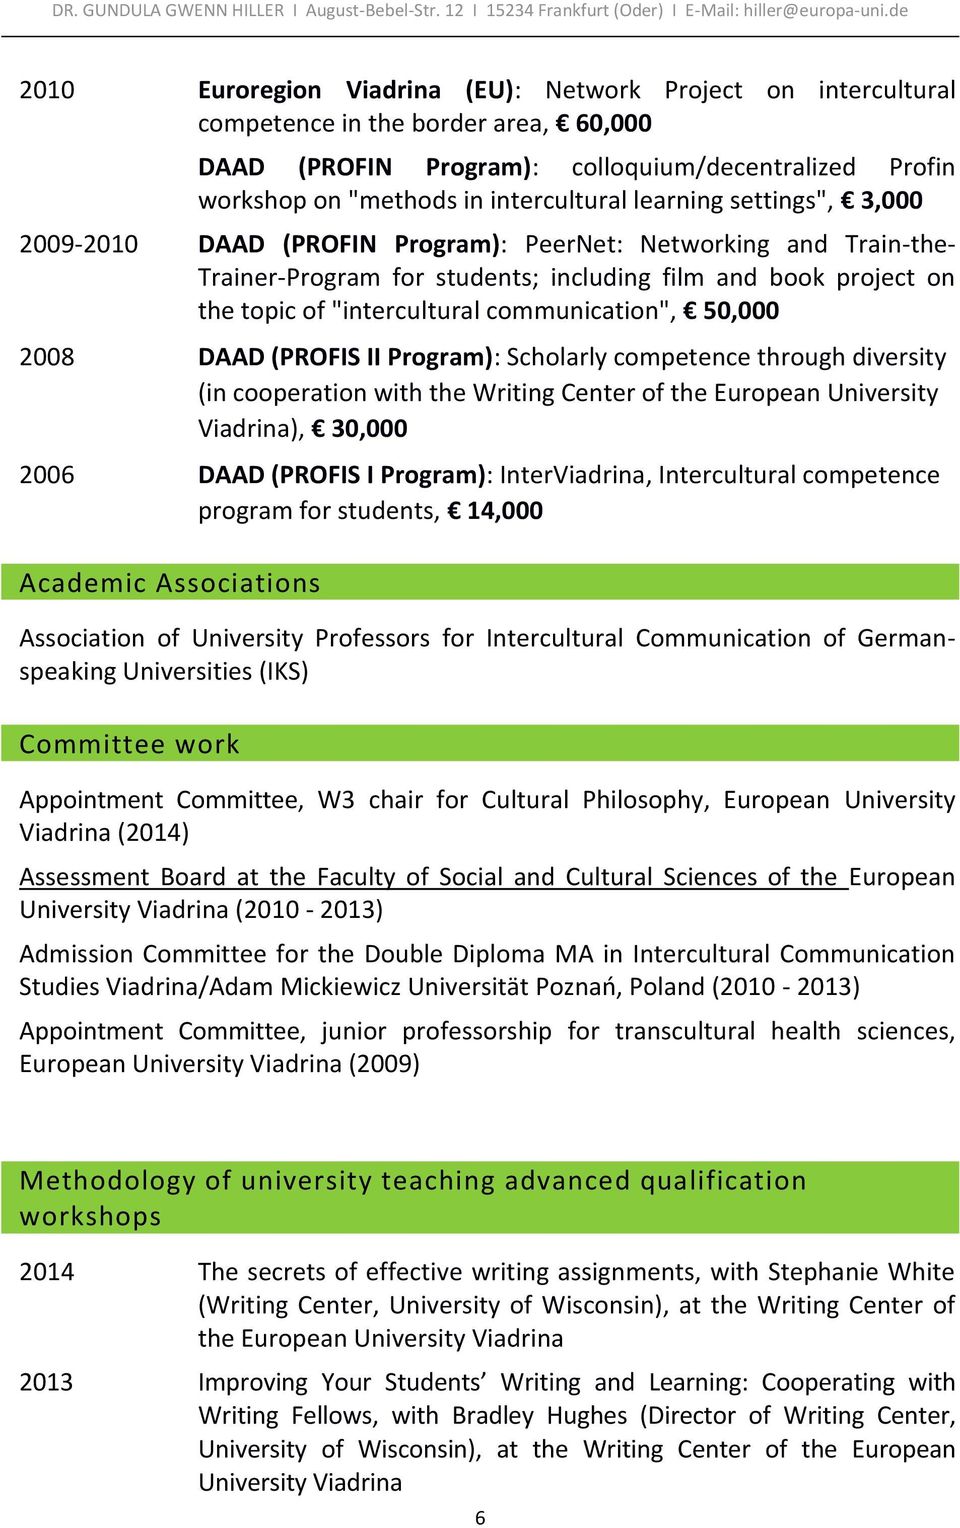 communication", 50,000 2008 DAAD (PROFIS II Program): Scholarly competence through diversity (in cooperation with the Writing Center of the European University Viadrina), 30,000 2006 DAAD (PROFIS I